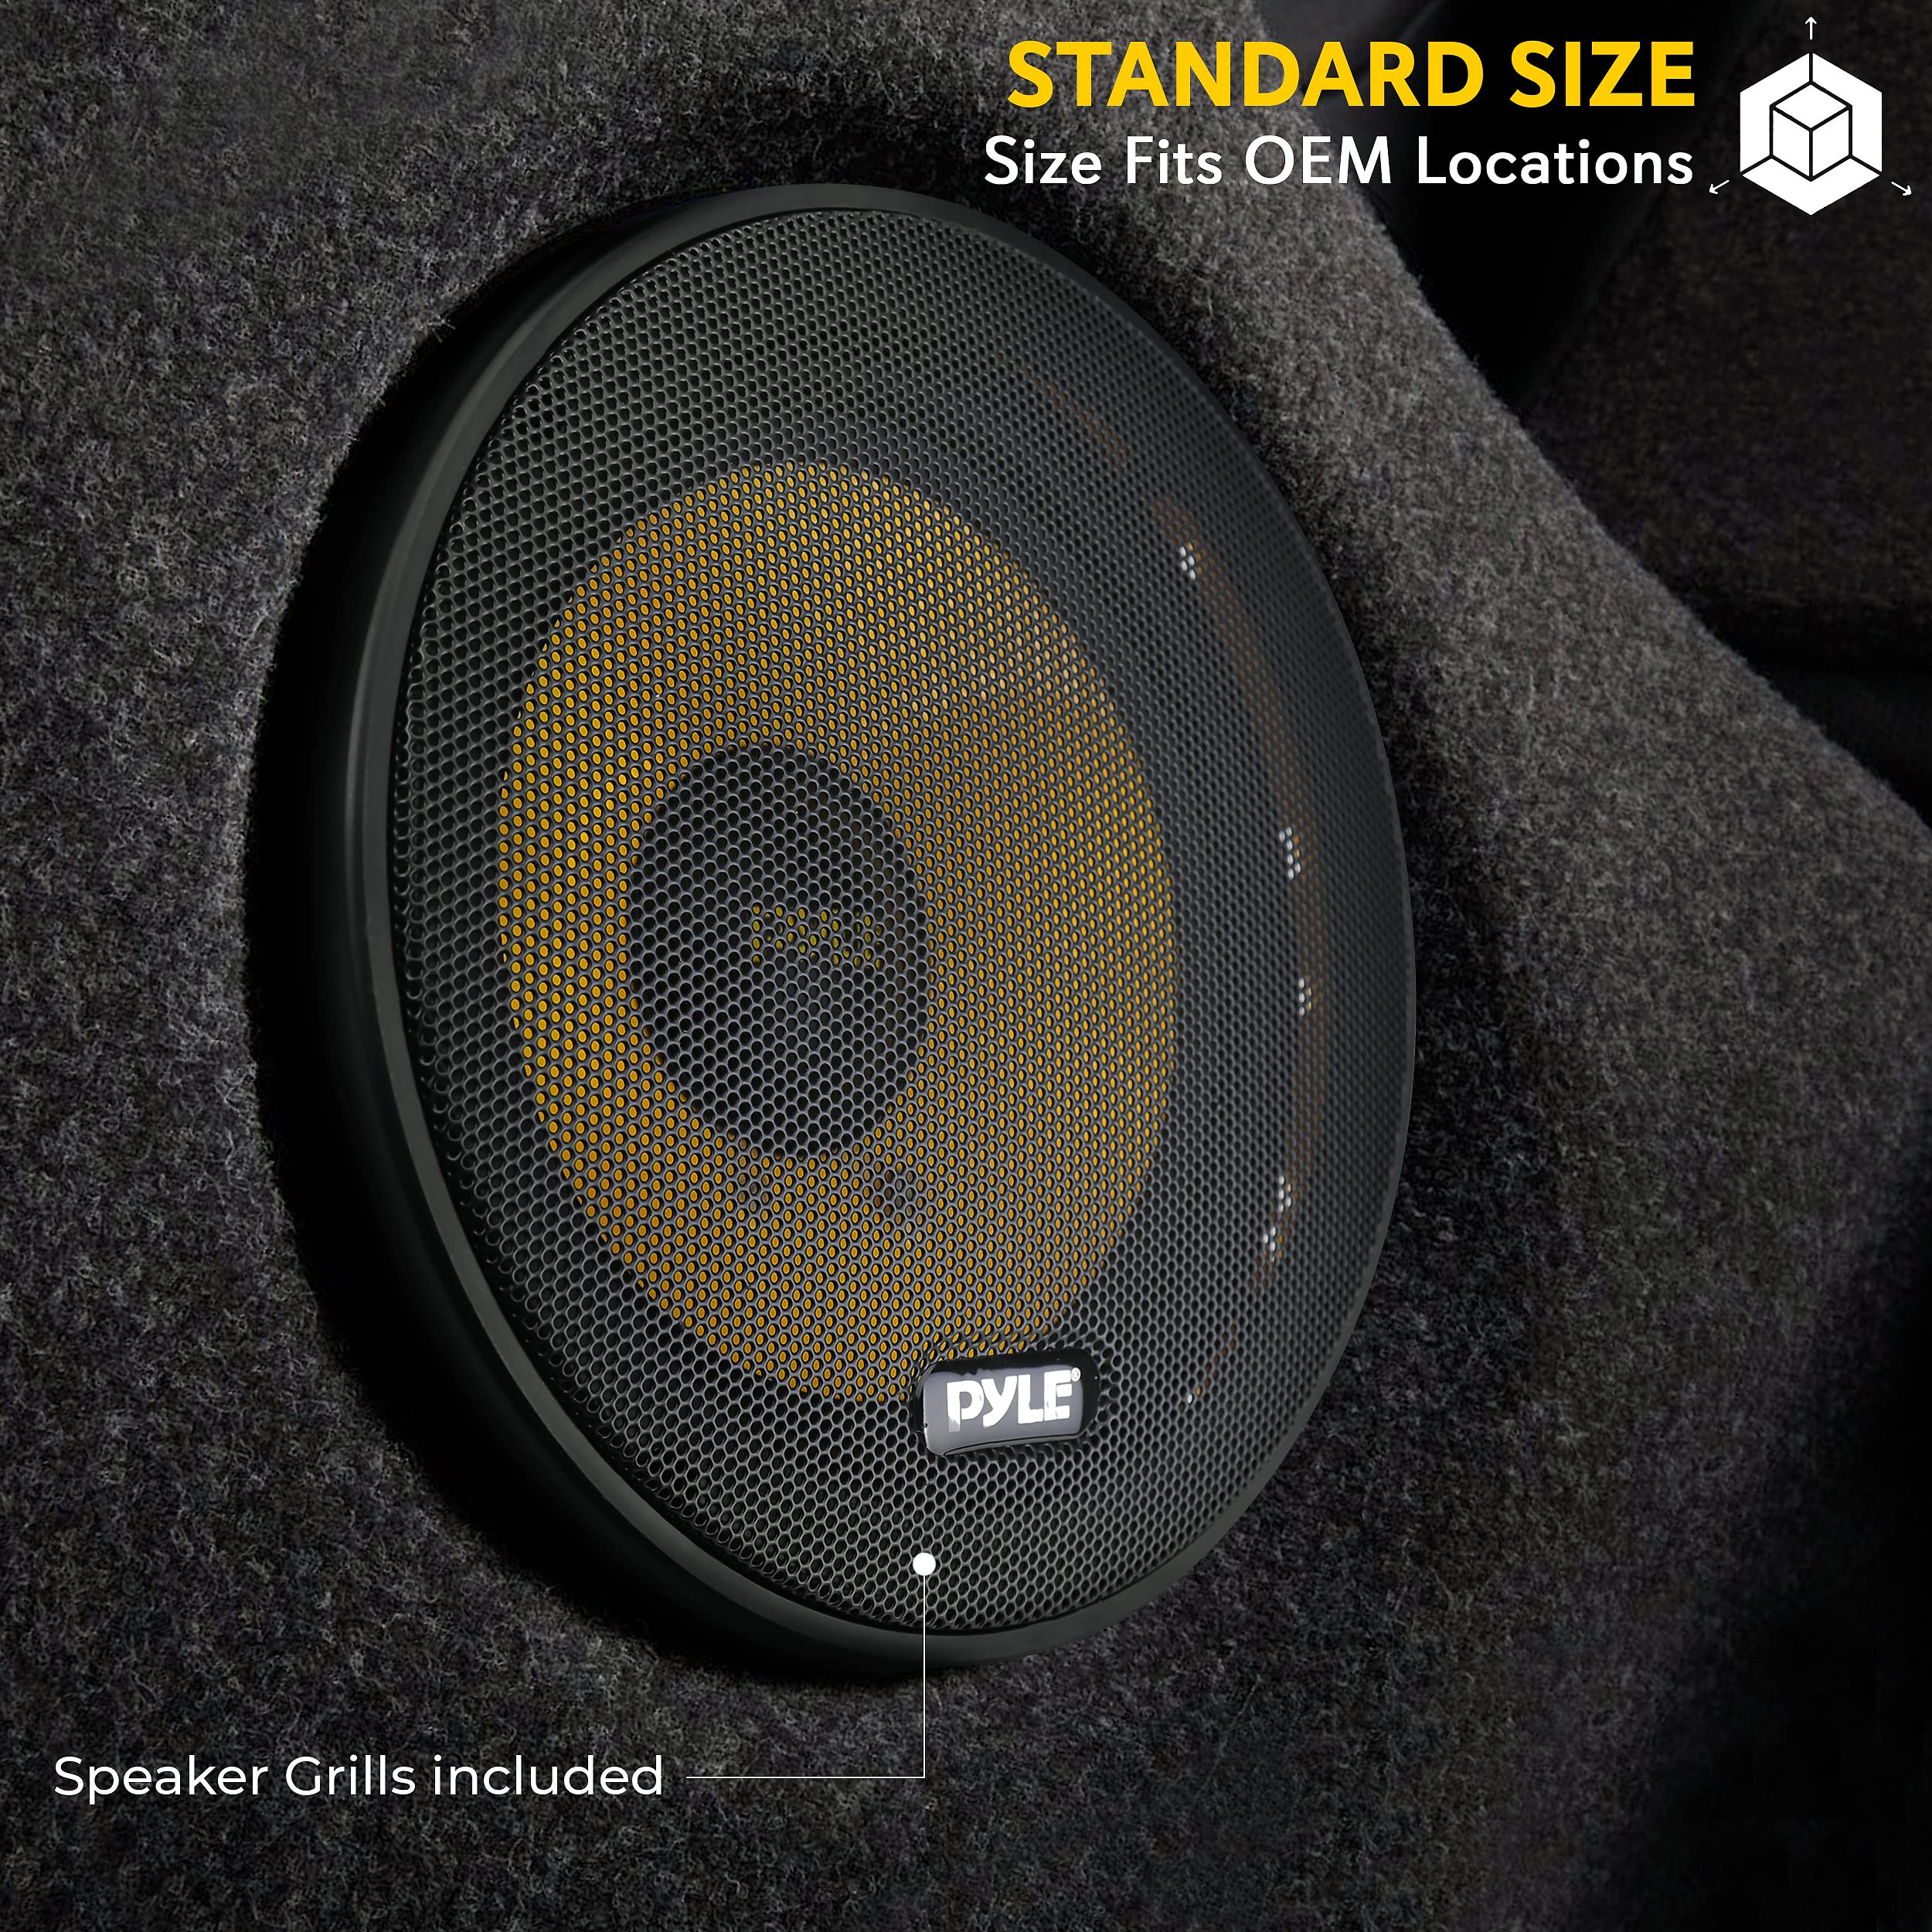 2Way Custom Component Speaker System - 6.5” 400 Watt Component with Electroplated Plastic Basket, Butyl Rubber Surround & 40Oz Magnet Structure - Wire Installation Hardware Set Included - Pyle PLG6C,Yellow